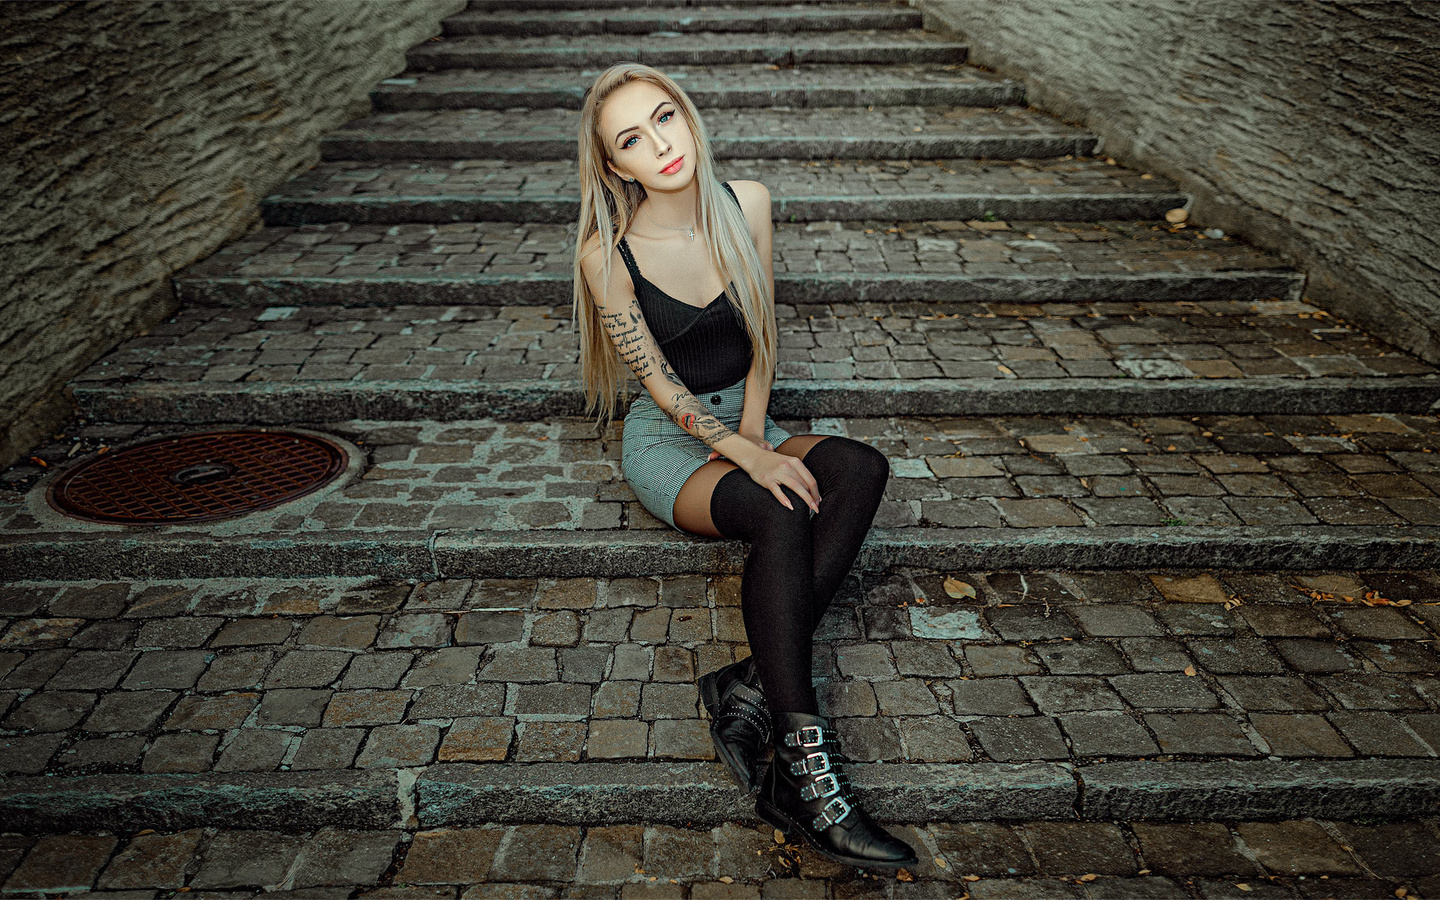 women, sitting, blonde, portrait, shoes, skirt, stairs, tattoo, knee-highs, black stockings, blue eyes, necklace, long hair